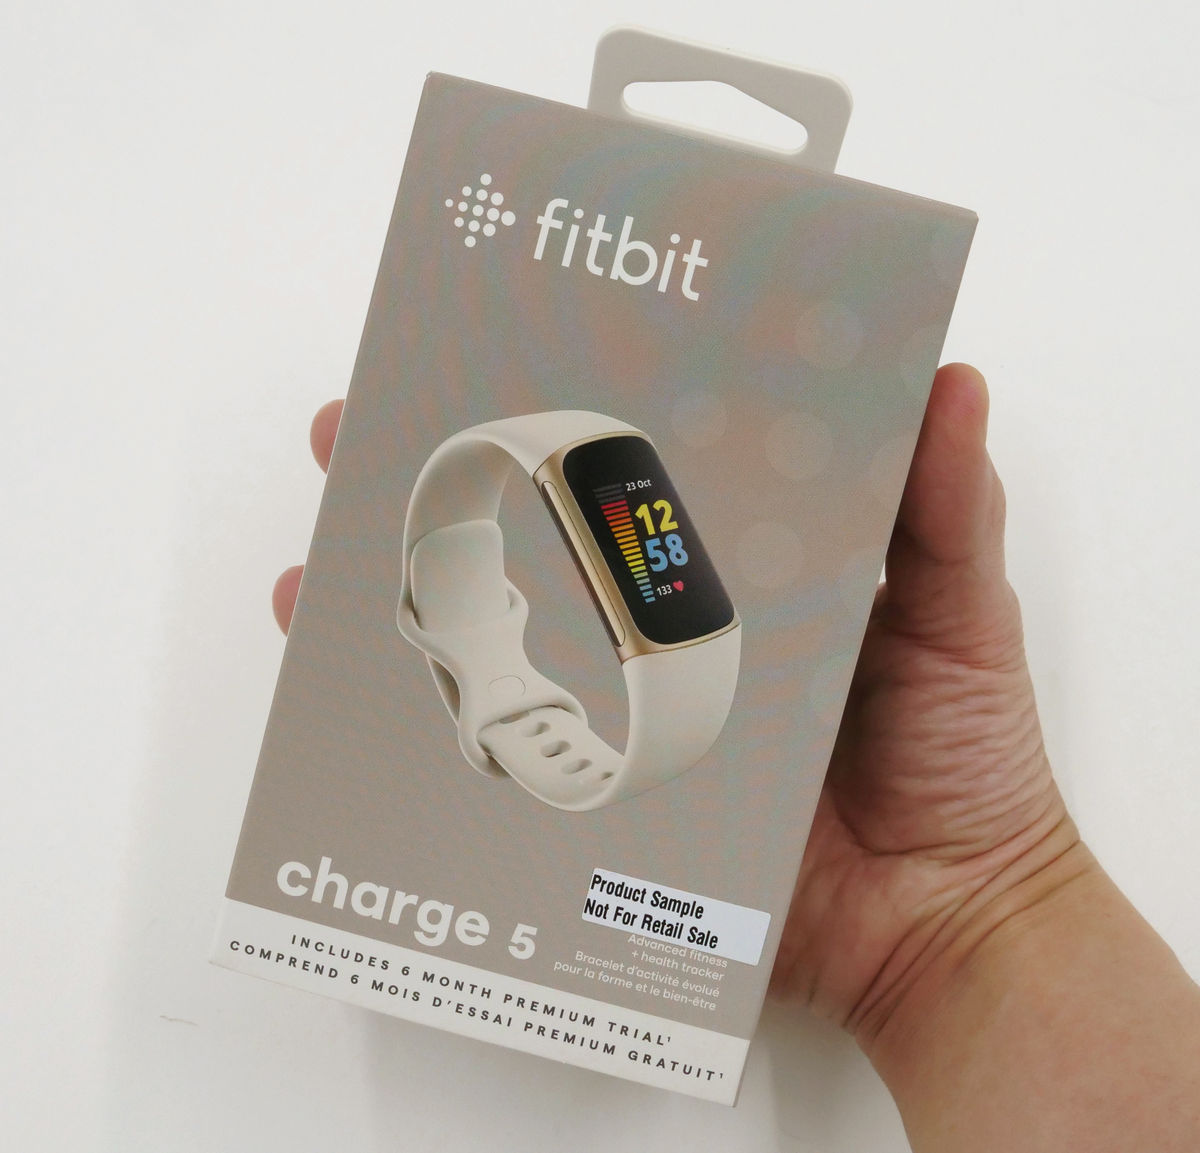 Fitbit's fitness tracker 'Charge 5' under the umbrella of Google